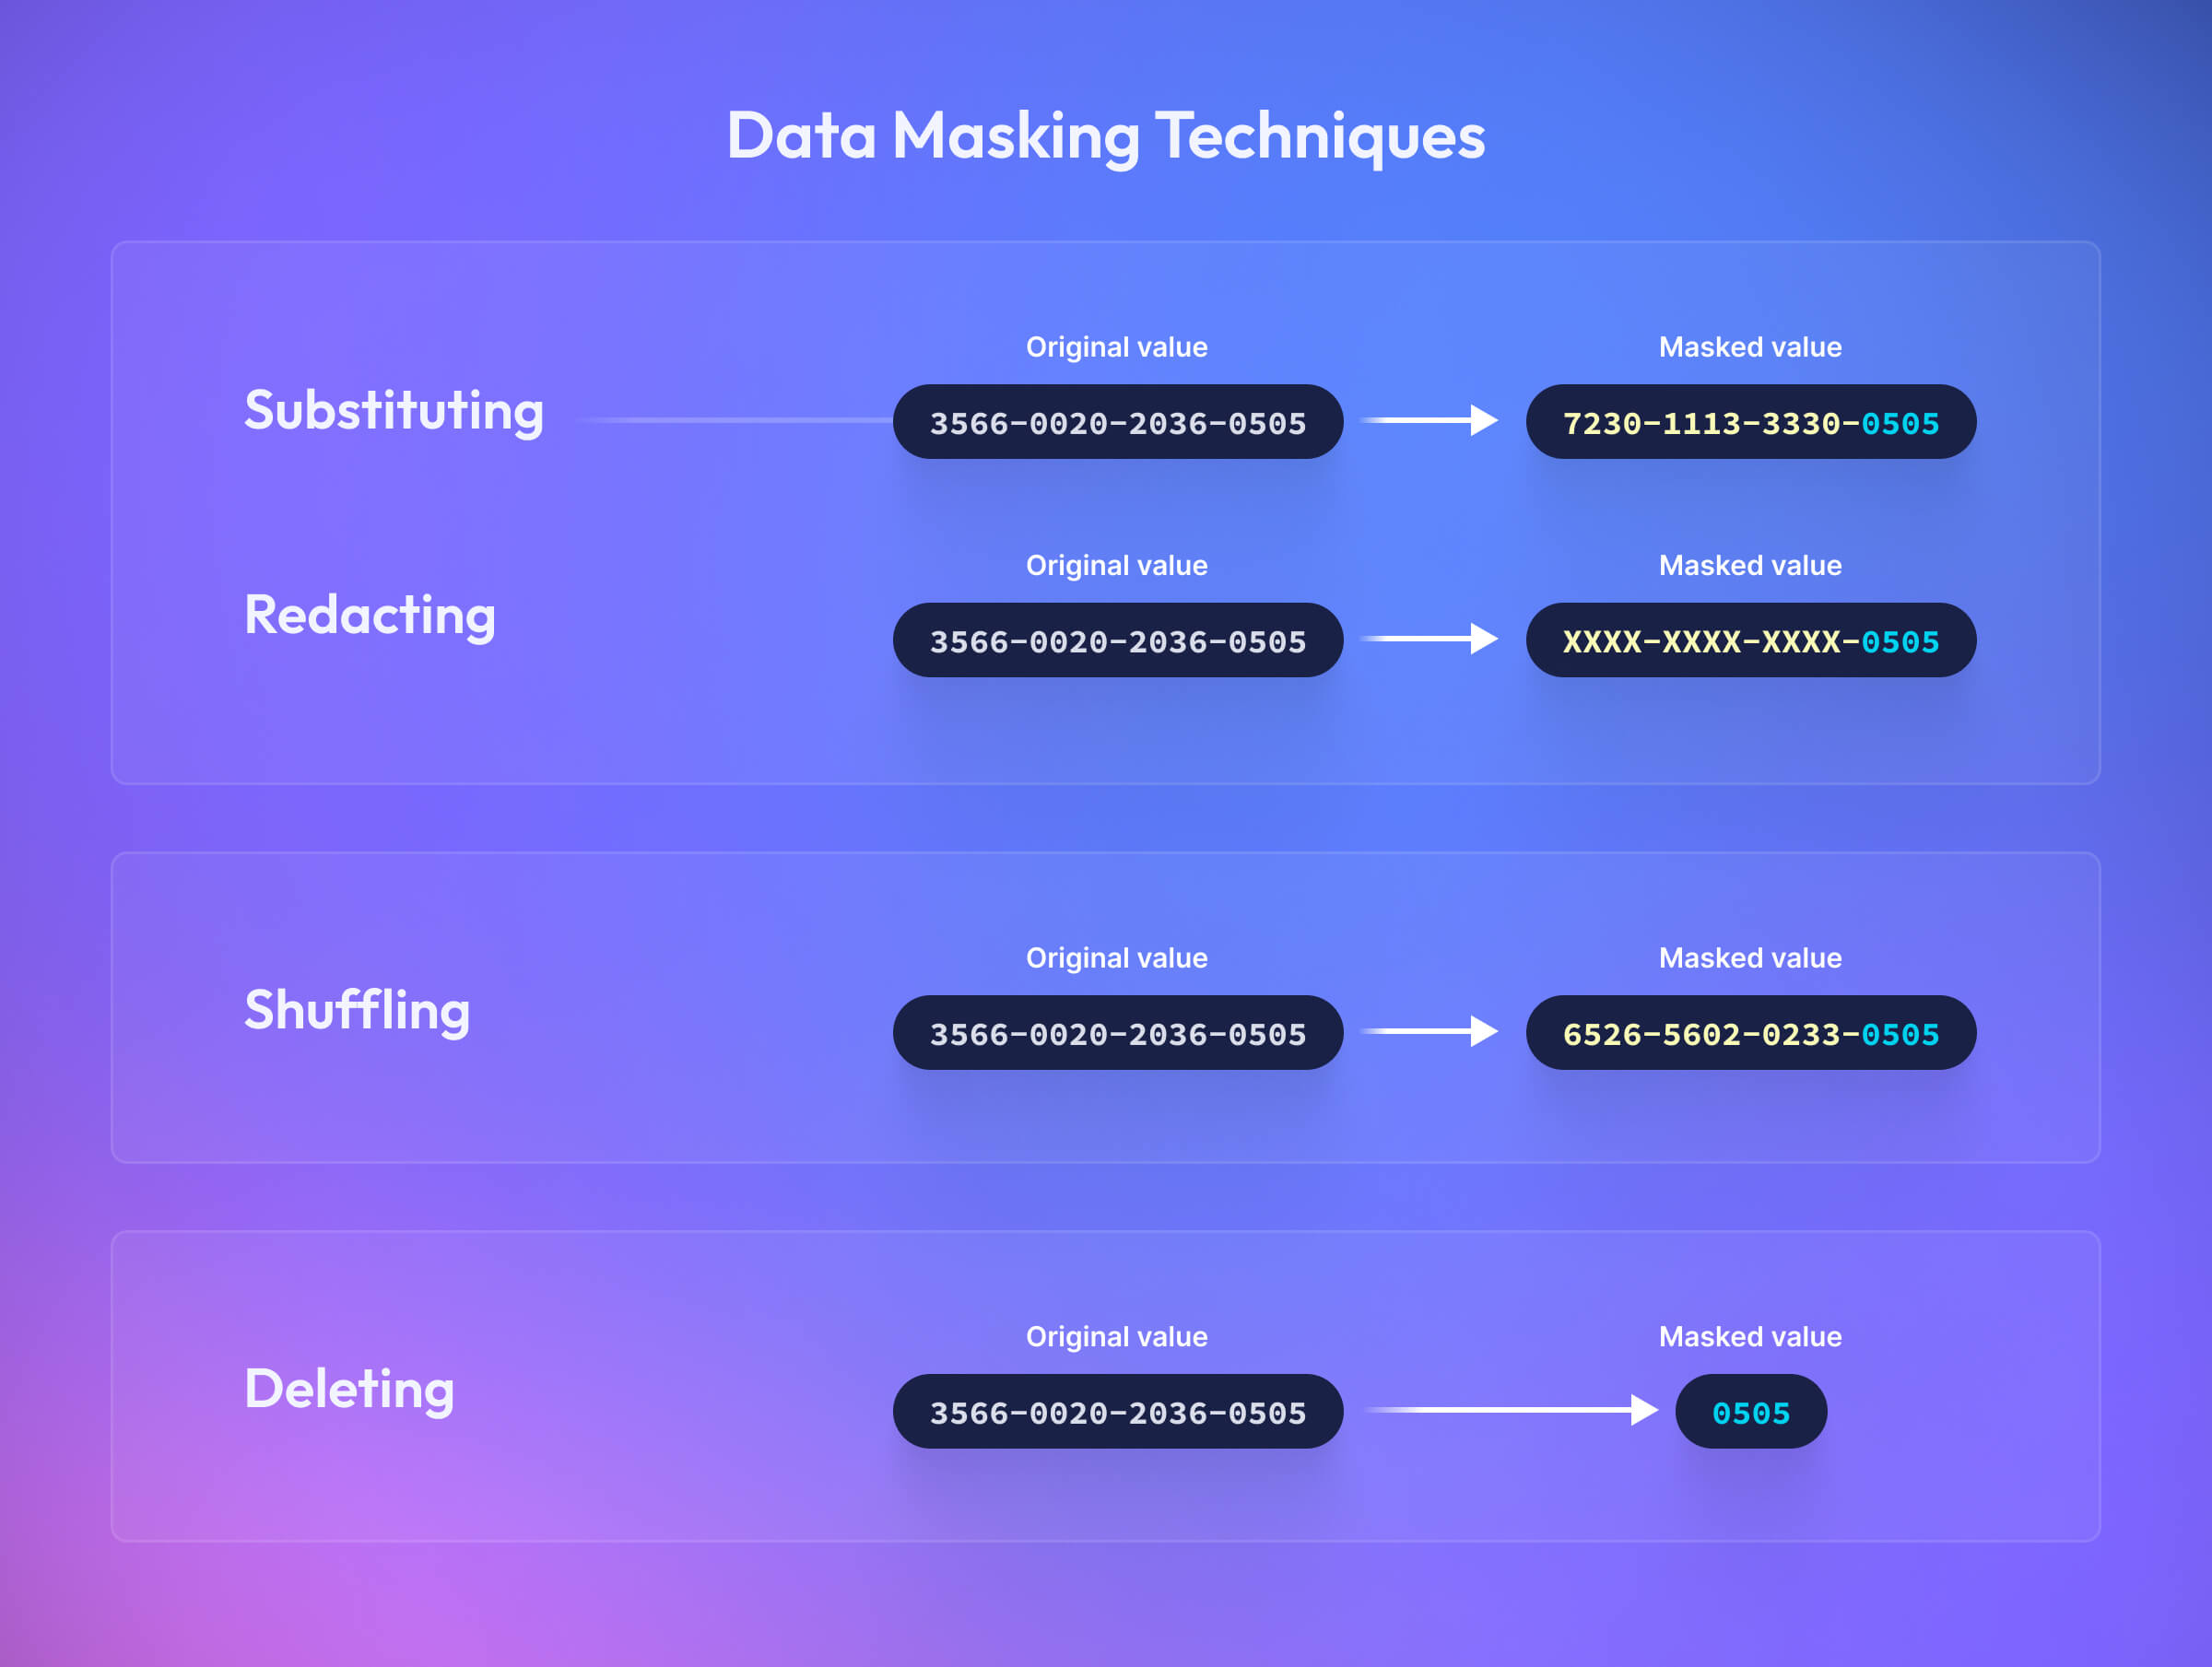 Substituting data, redacting data, shuffling data, and deleting data are all techniques to obfuscate an original value. 